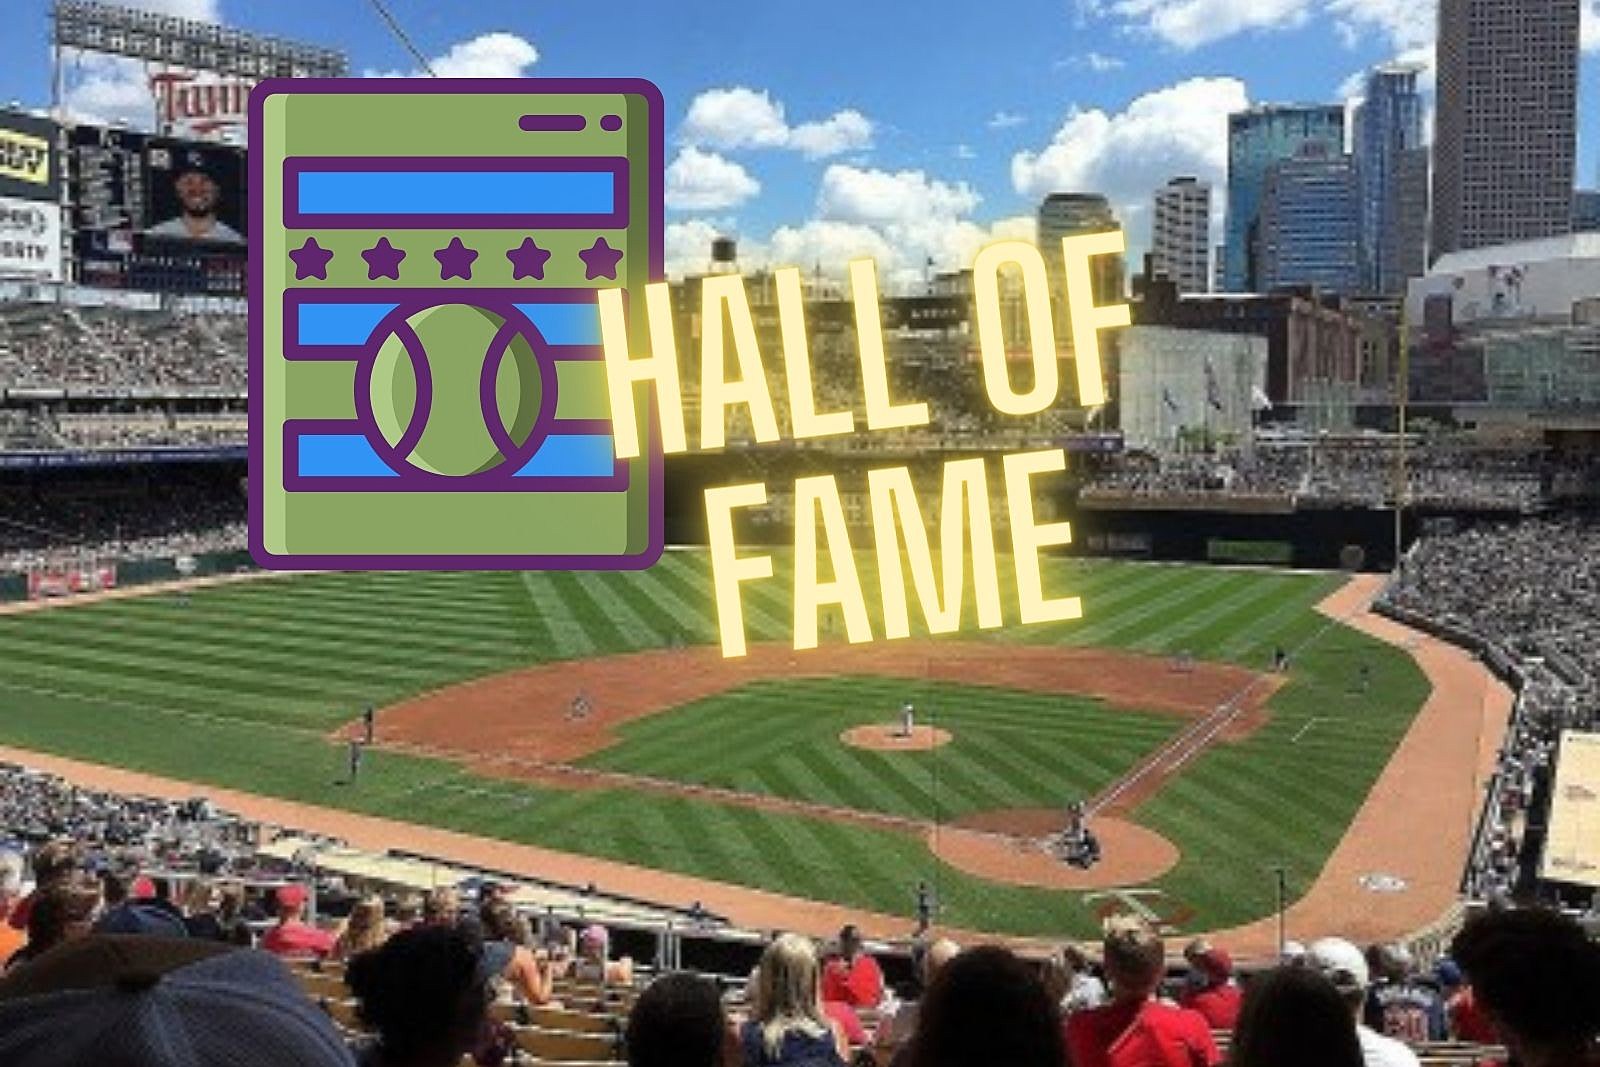 Joe Mauer Being Inducted into MN Twins Hall of Fame